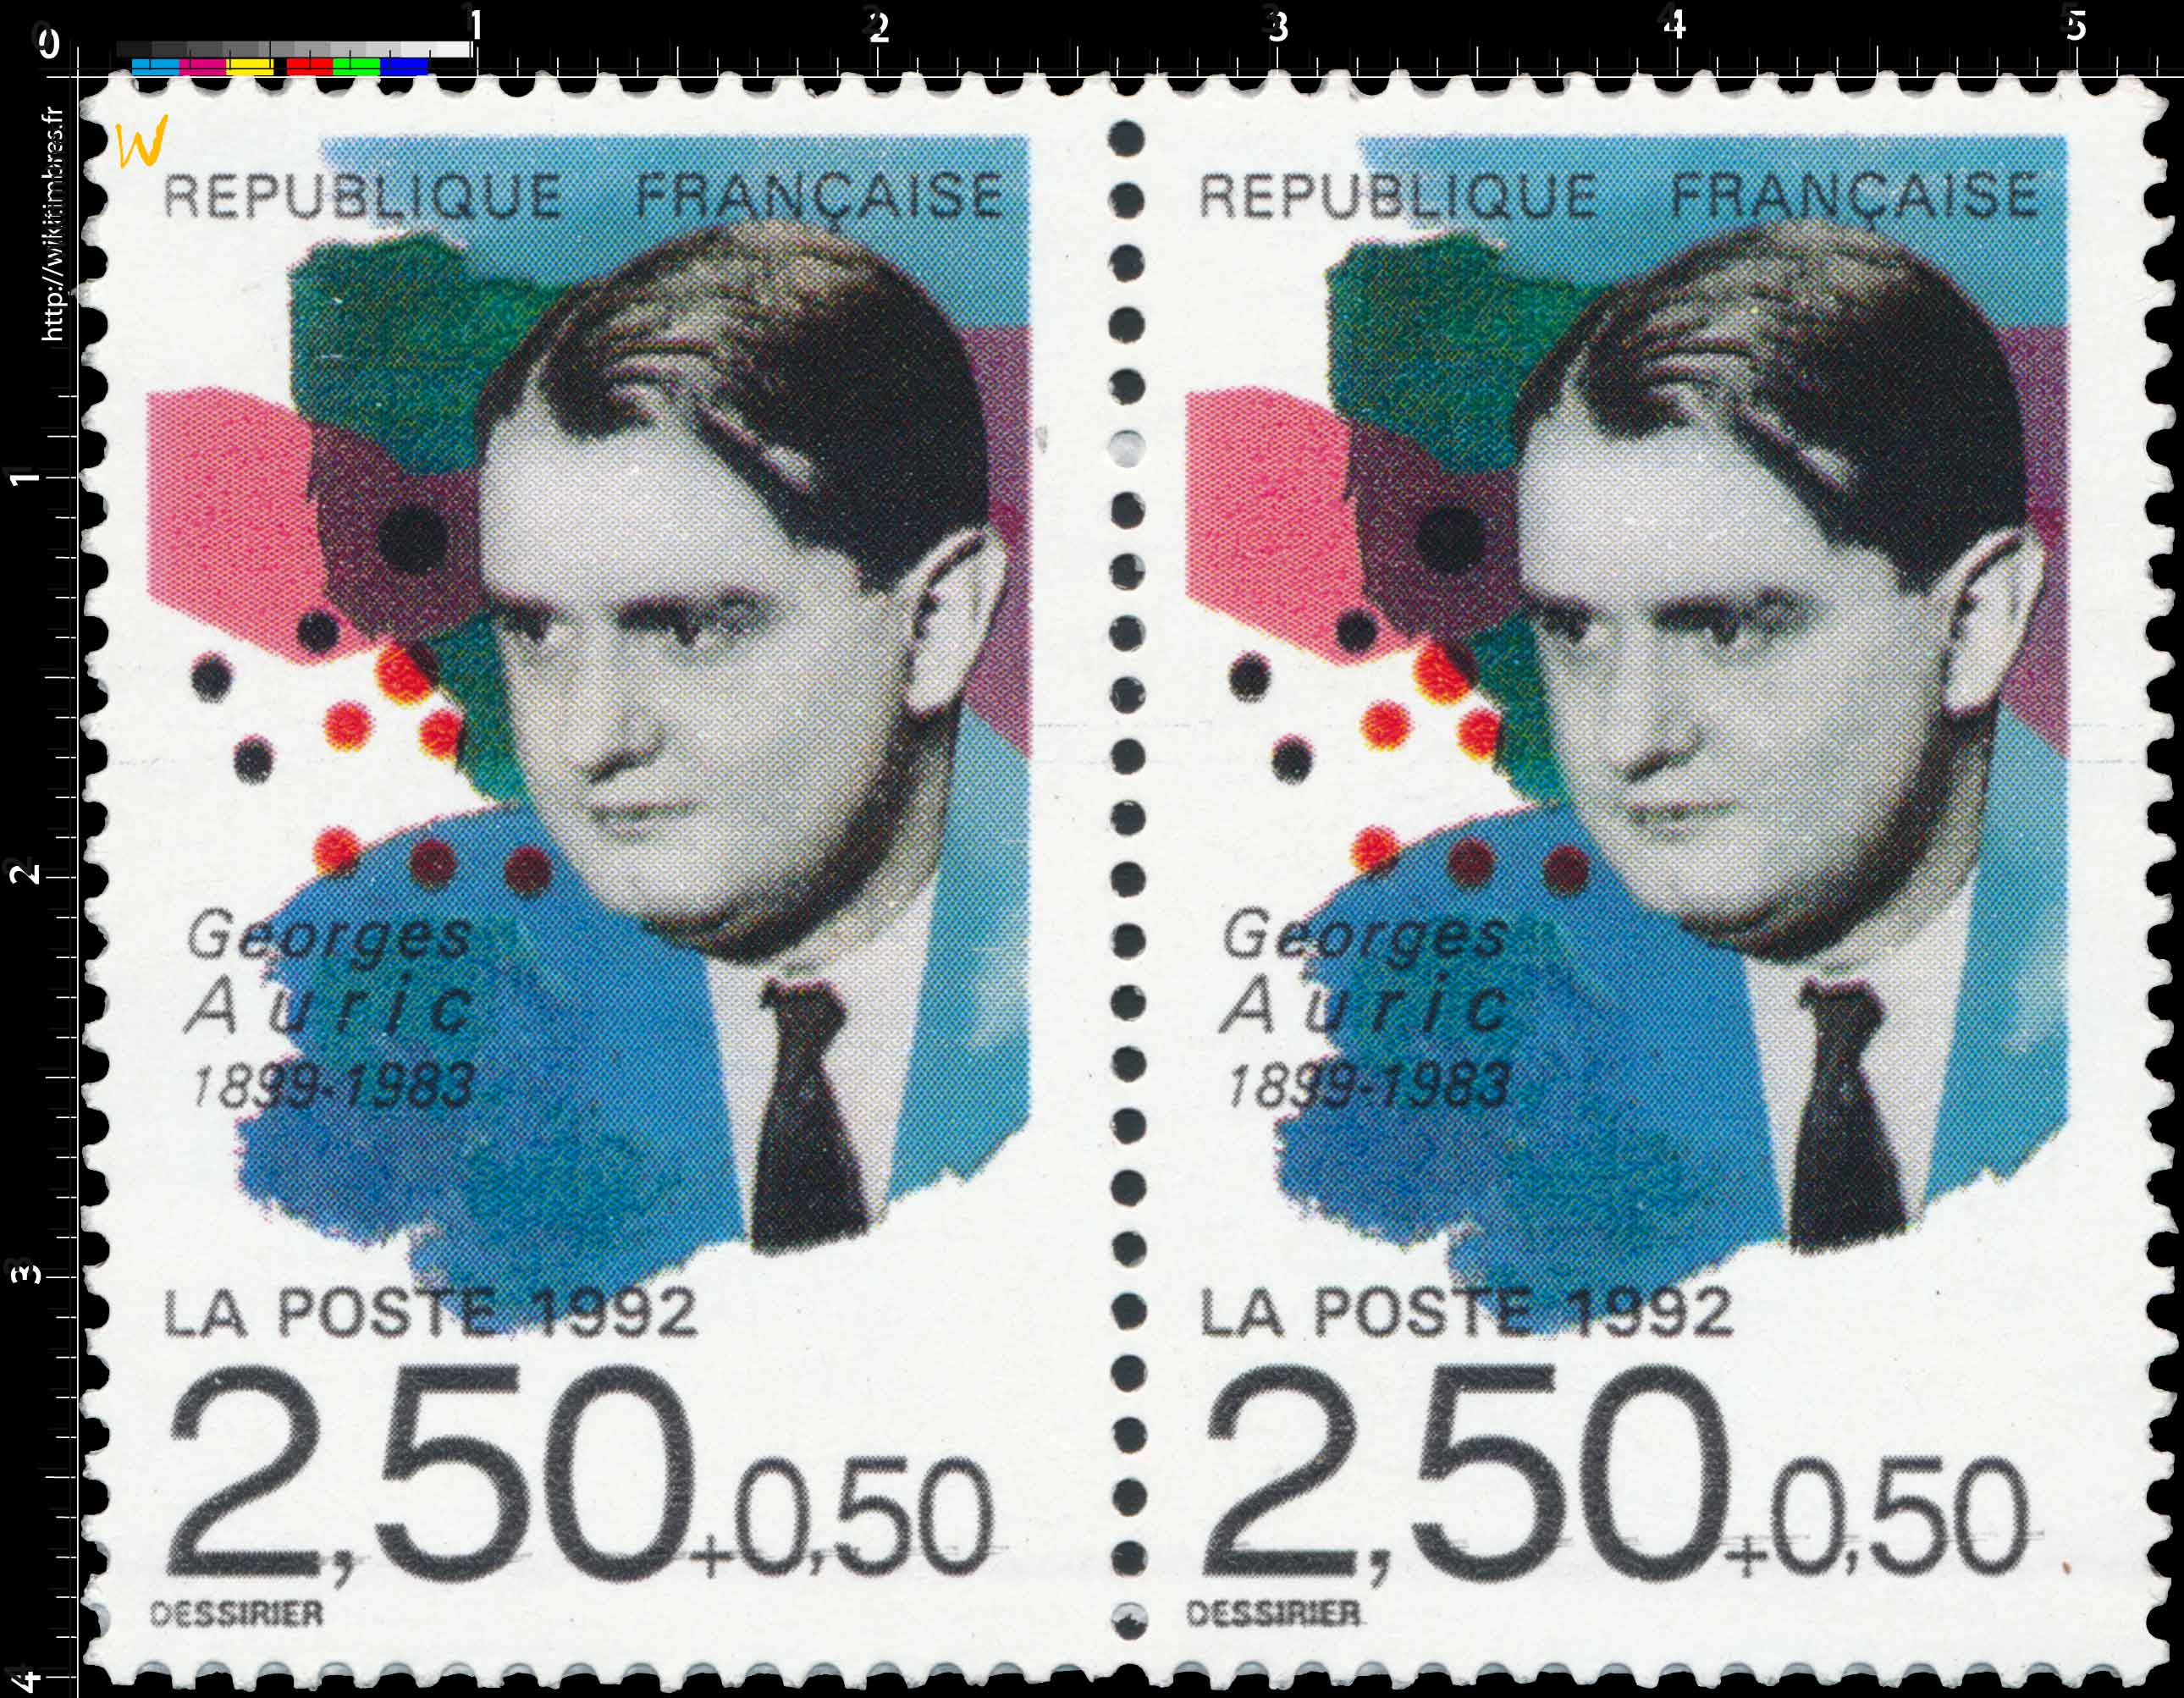 1992 Georges Auric 1899-1983